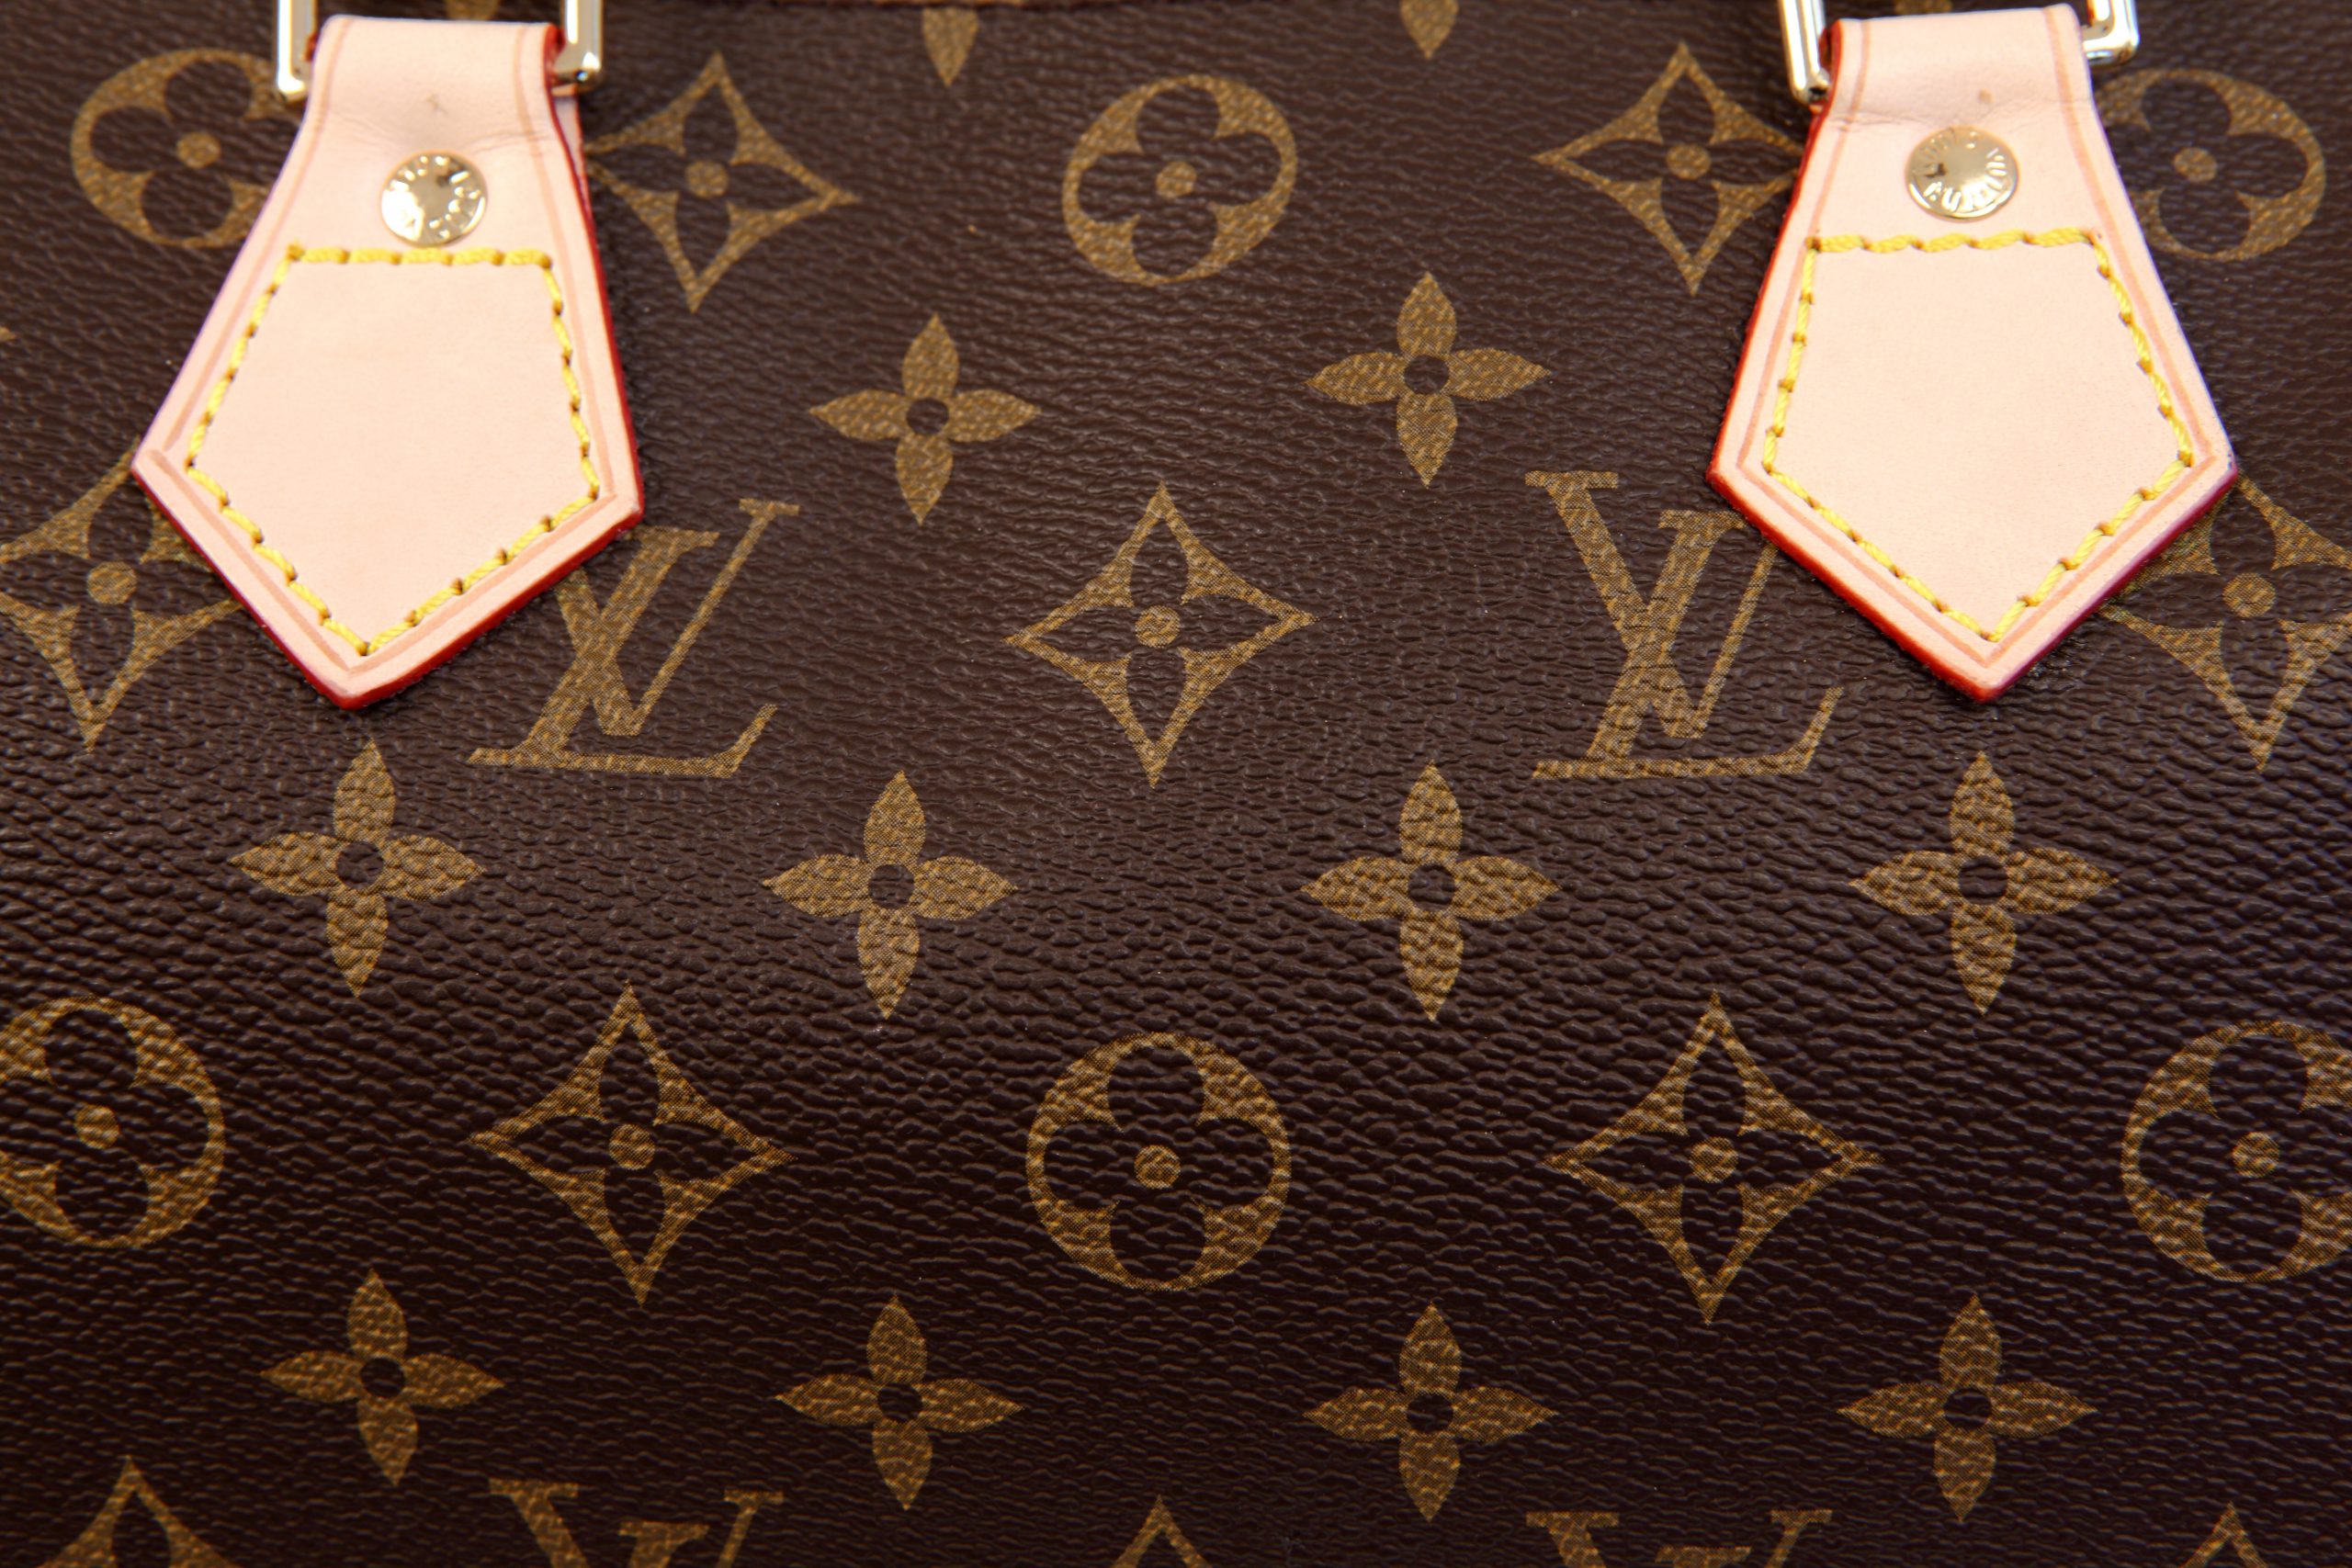 Why Is Louis Vuitton Opening a Factory in Texas?